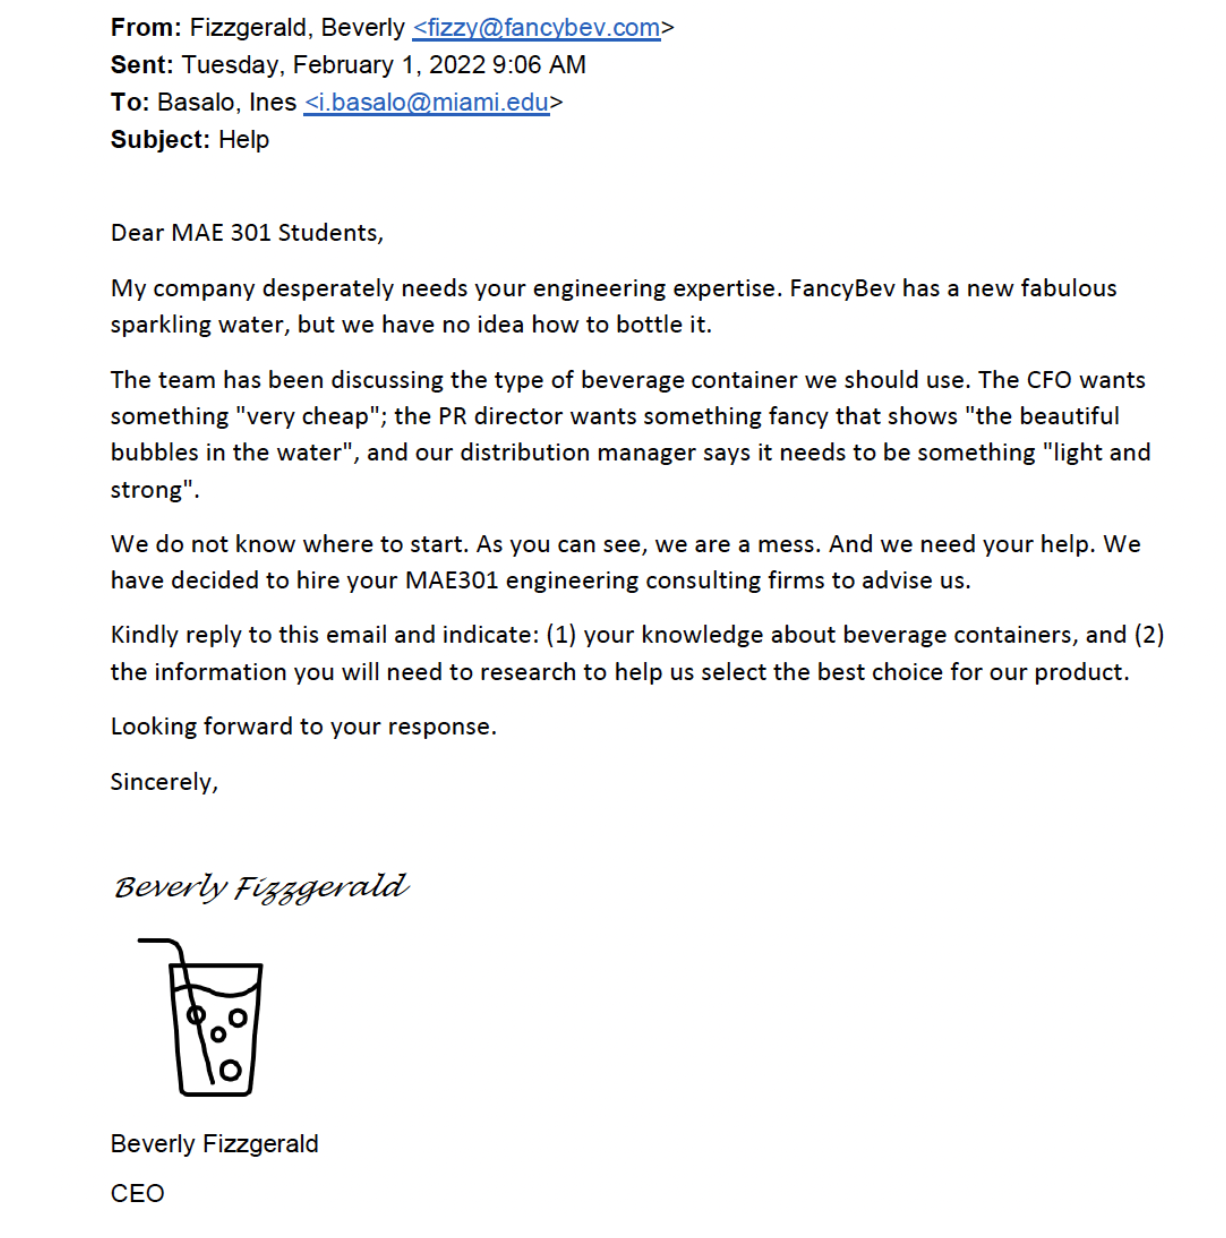 From: Fizzgerald, Beverly <fizzy@fancybev.com> Sent: Tuesday. February 1, 2022 9:06 AM To: Basalo, Ines <i.basalo@miami edu> Subject: Help Dear MAE 301 Students, My company desperately needs your engineering expertise. FancyBev has a new fabulous sparkling water, but we have no idea how to bottle it. The team has been discussing the type of beverage container we should use. The CFO wants something "very cheap"; the PR director wants something fancy that shows "the beautiful bubbles in the water", and our distribution manager says it needs to be something "light and strong' We do not know where to start. As you can see, we are a mess. And we need your help. We have decided to hire your MA301 engineering consulting firms to advise us. Kindly reply to this email and indicate: (1) your knowledge about beverage containers, and (2) the information you will need to research to help us select the best choice for our product. Looking forward to your response. Sincerely, Beverly Fizzgerald, CEO